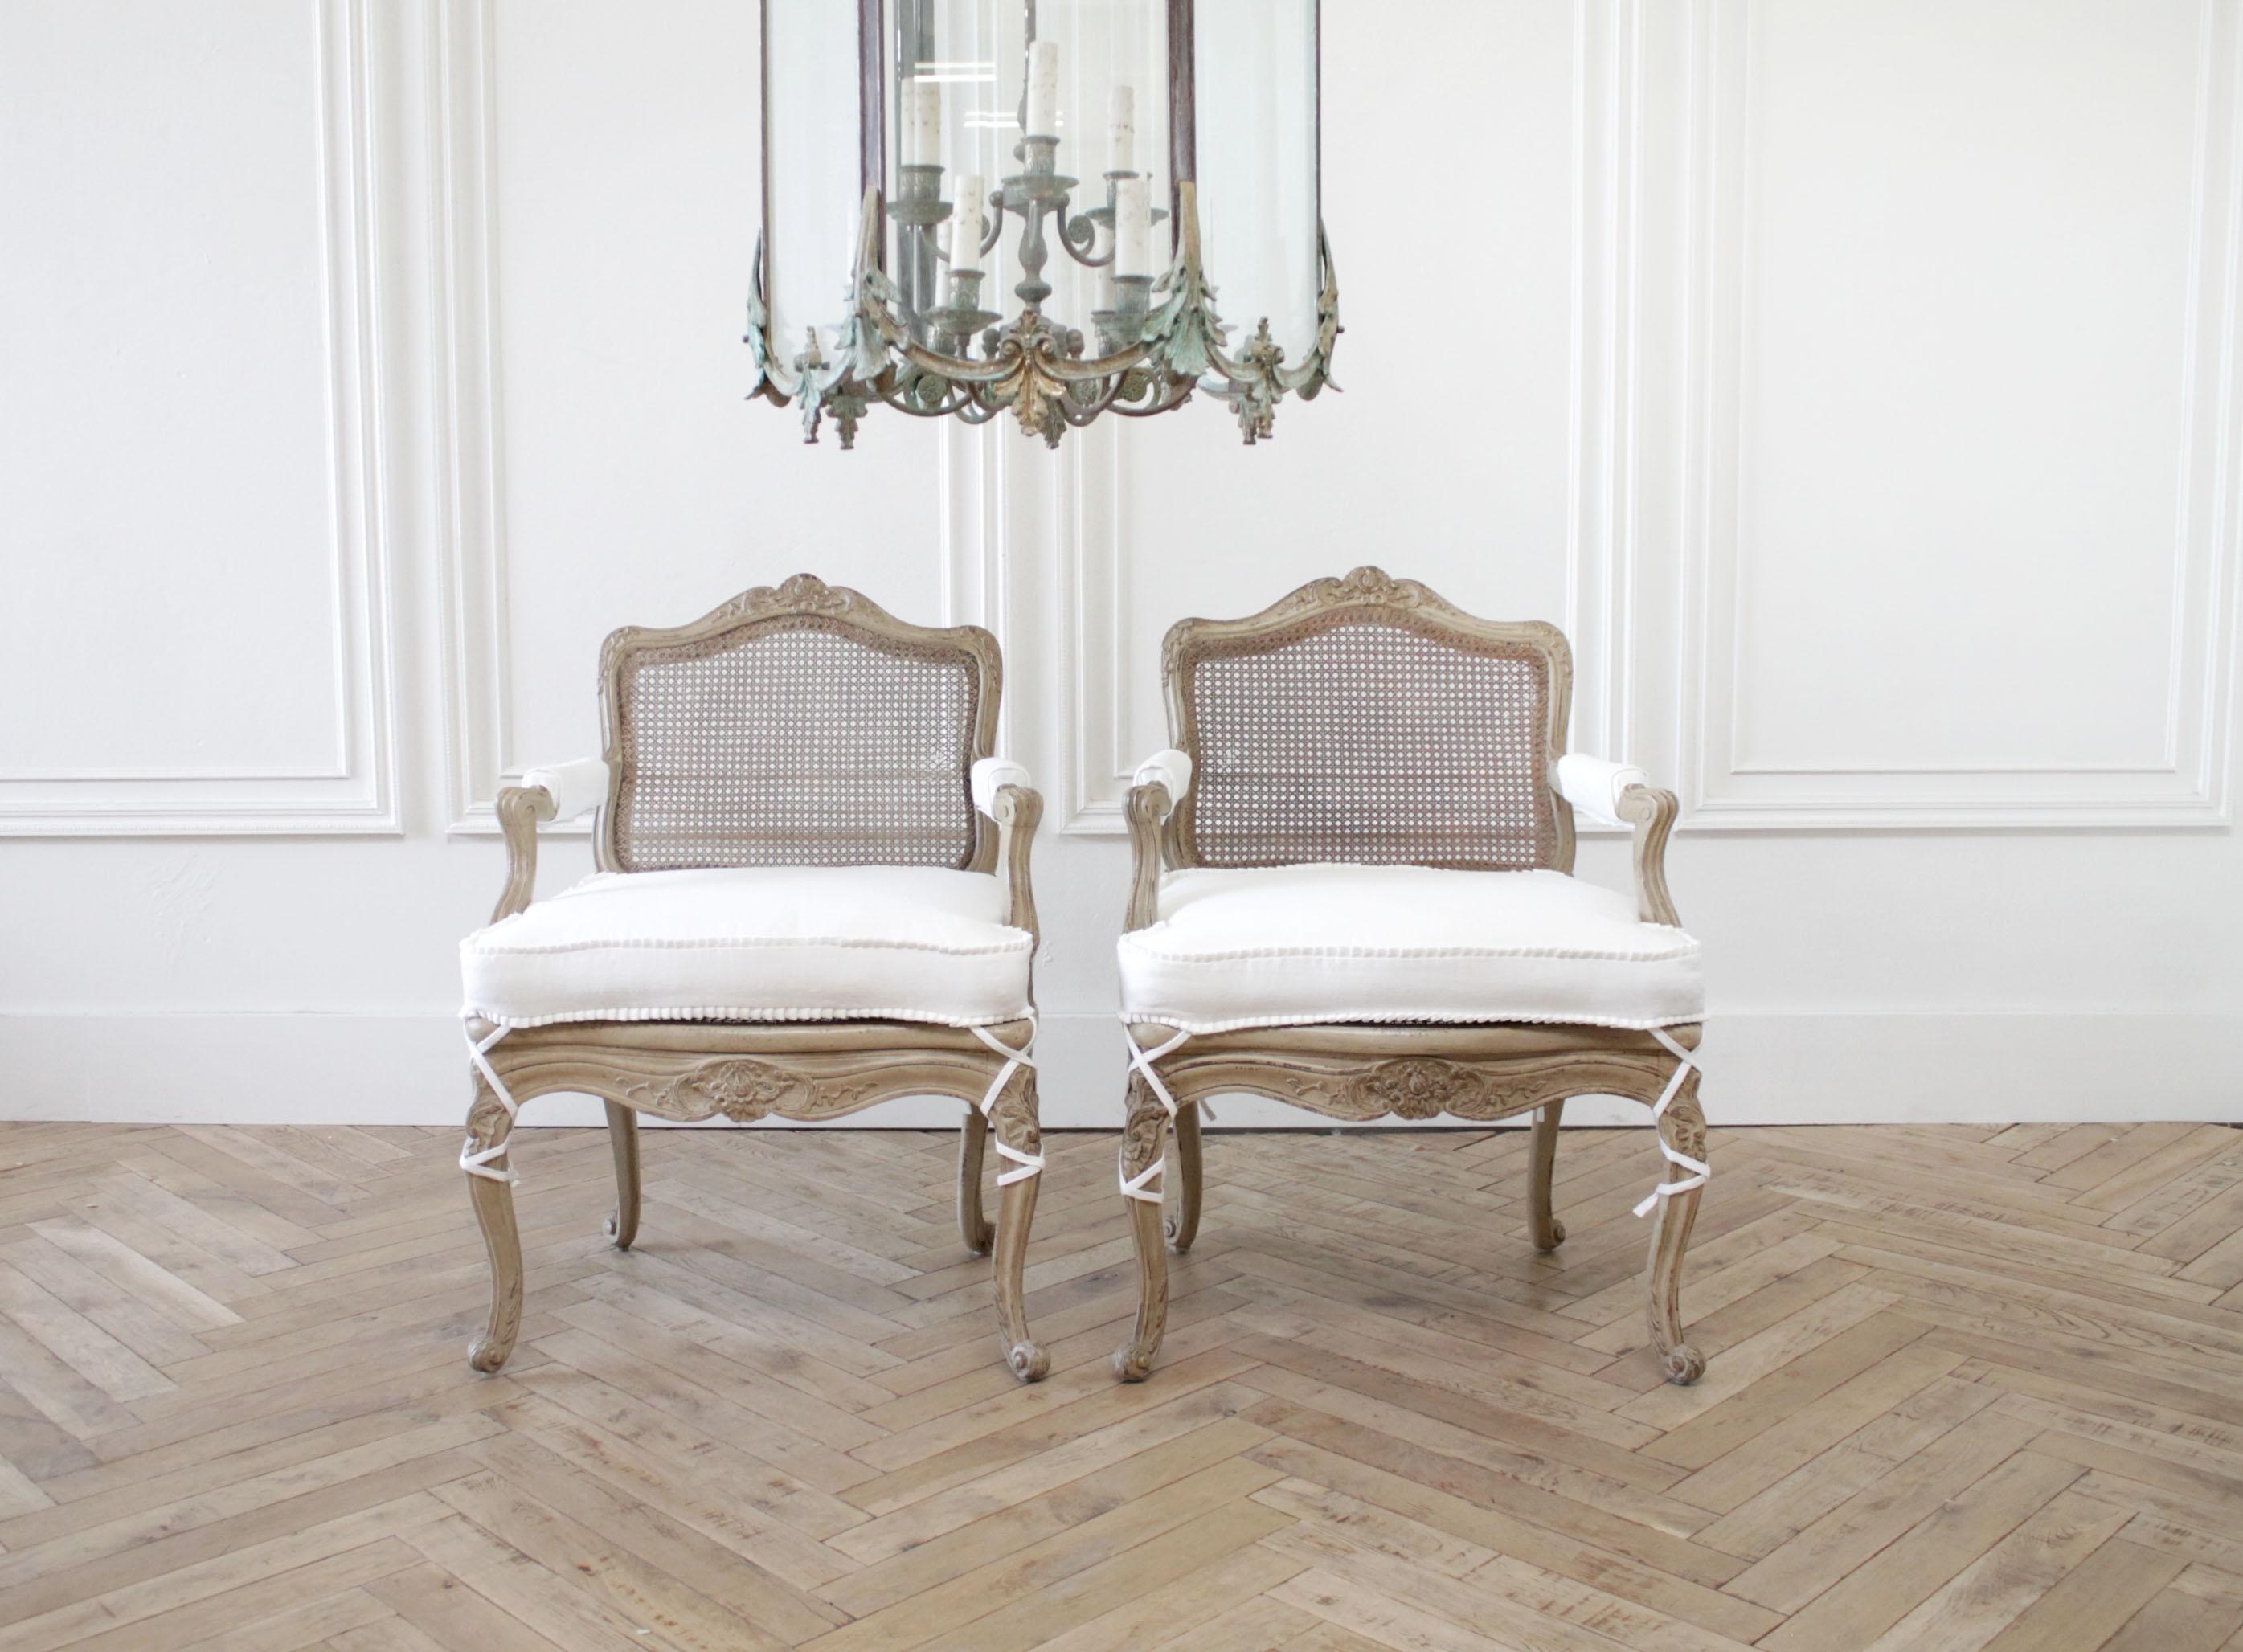 French Provincial Pair of Antique French Arm Chairs in Original Painted Finish and White Linen